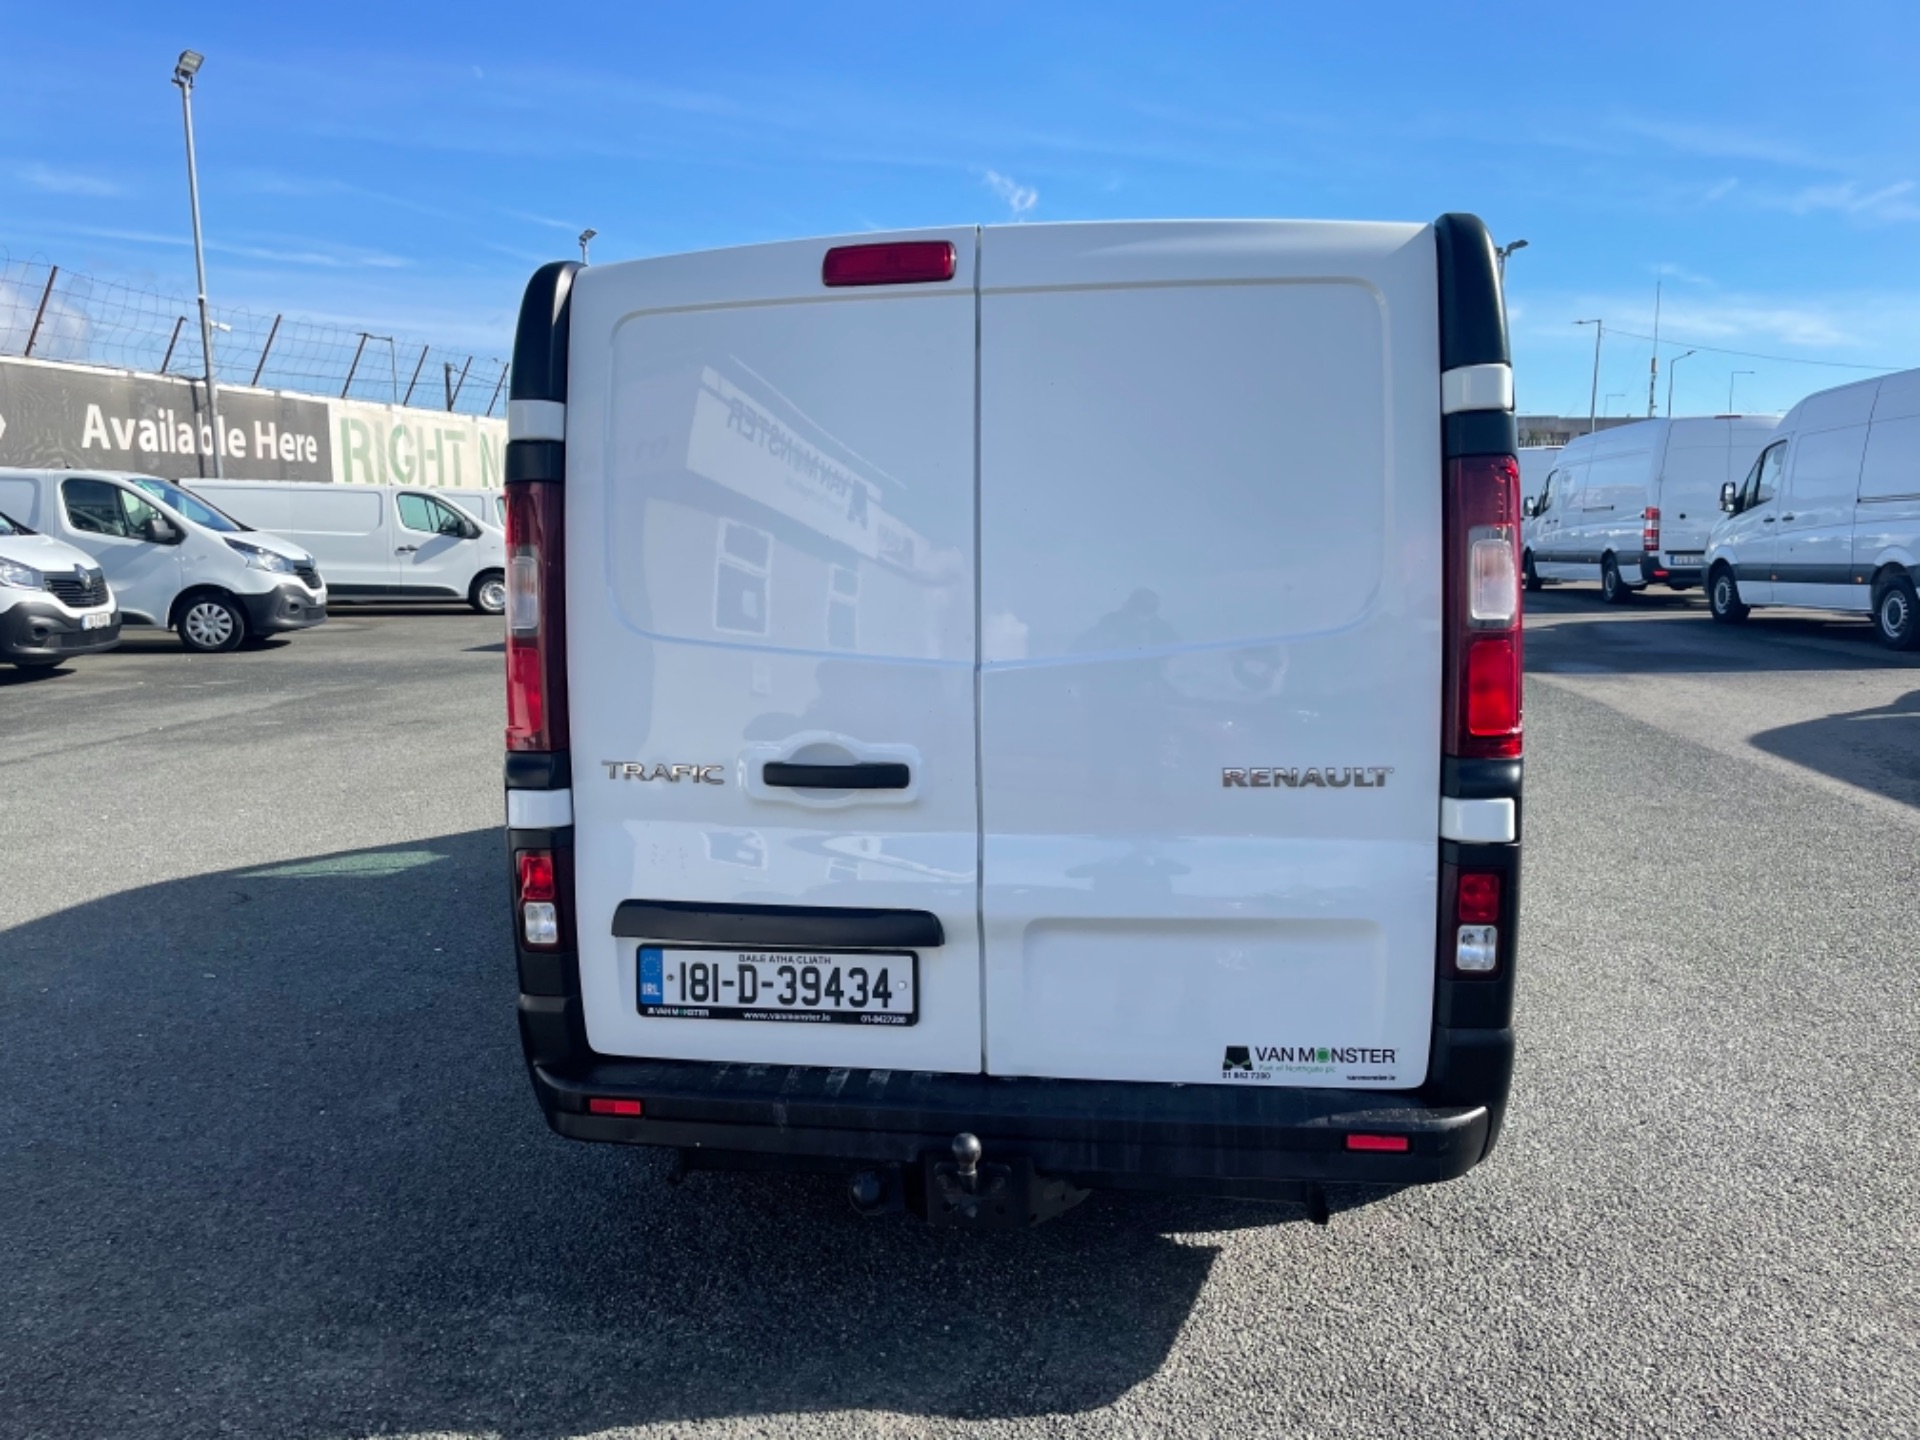 2018 Renault Trafic LL29 DCI 120 Business 3DR (181D39434) Thumbnail 6